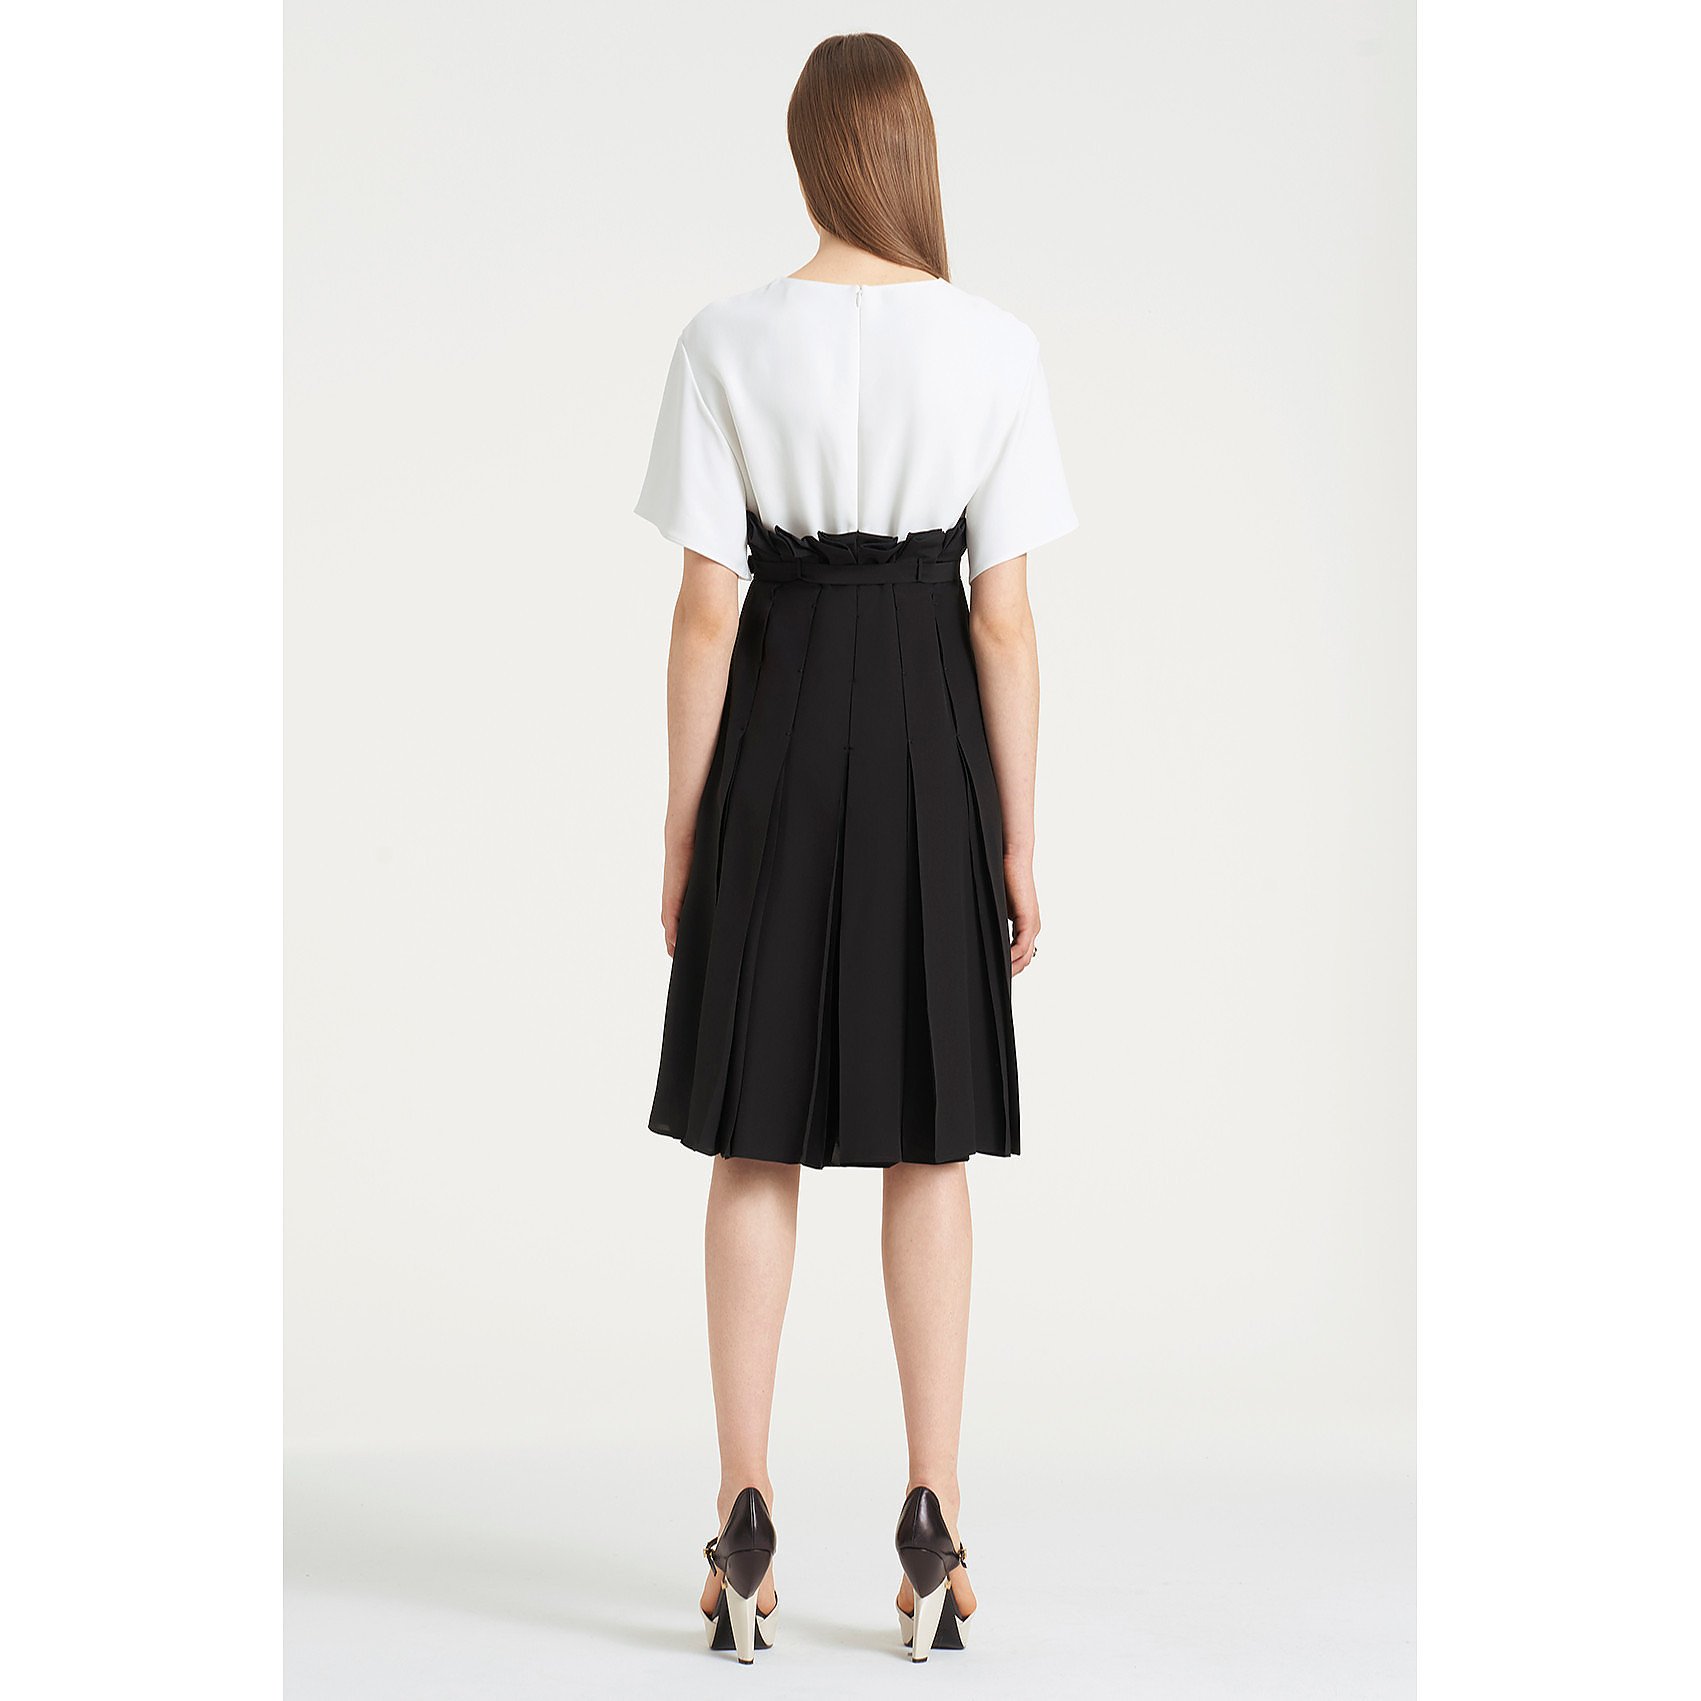 PORTS 1961 Two-Tone Belted Dress